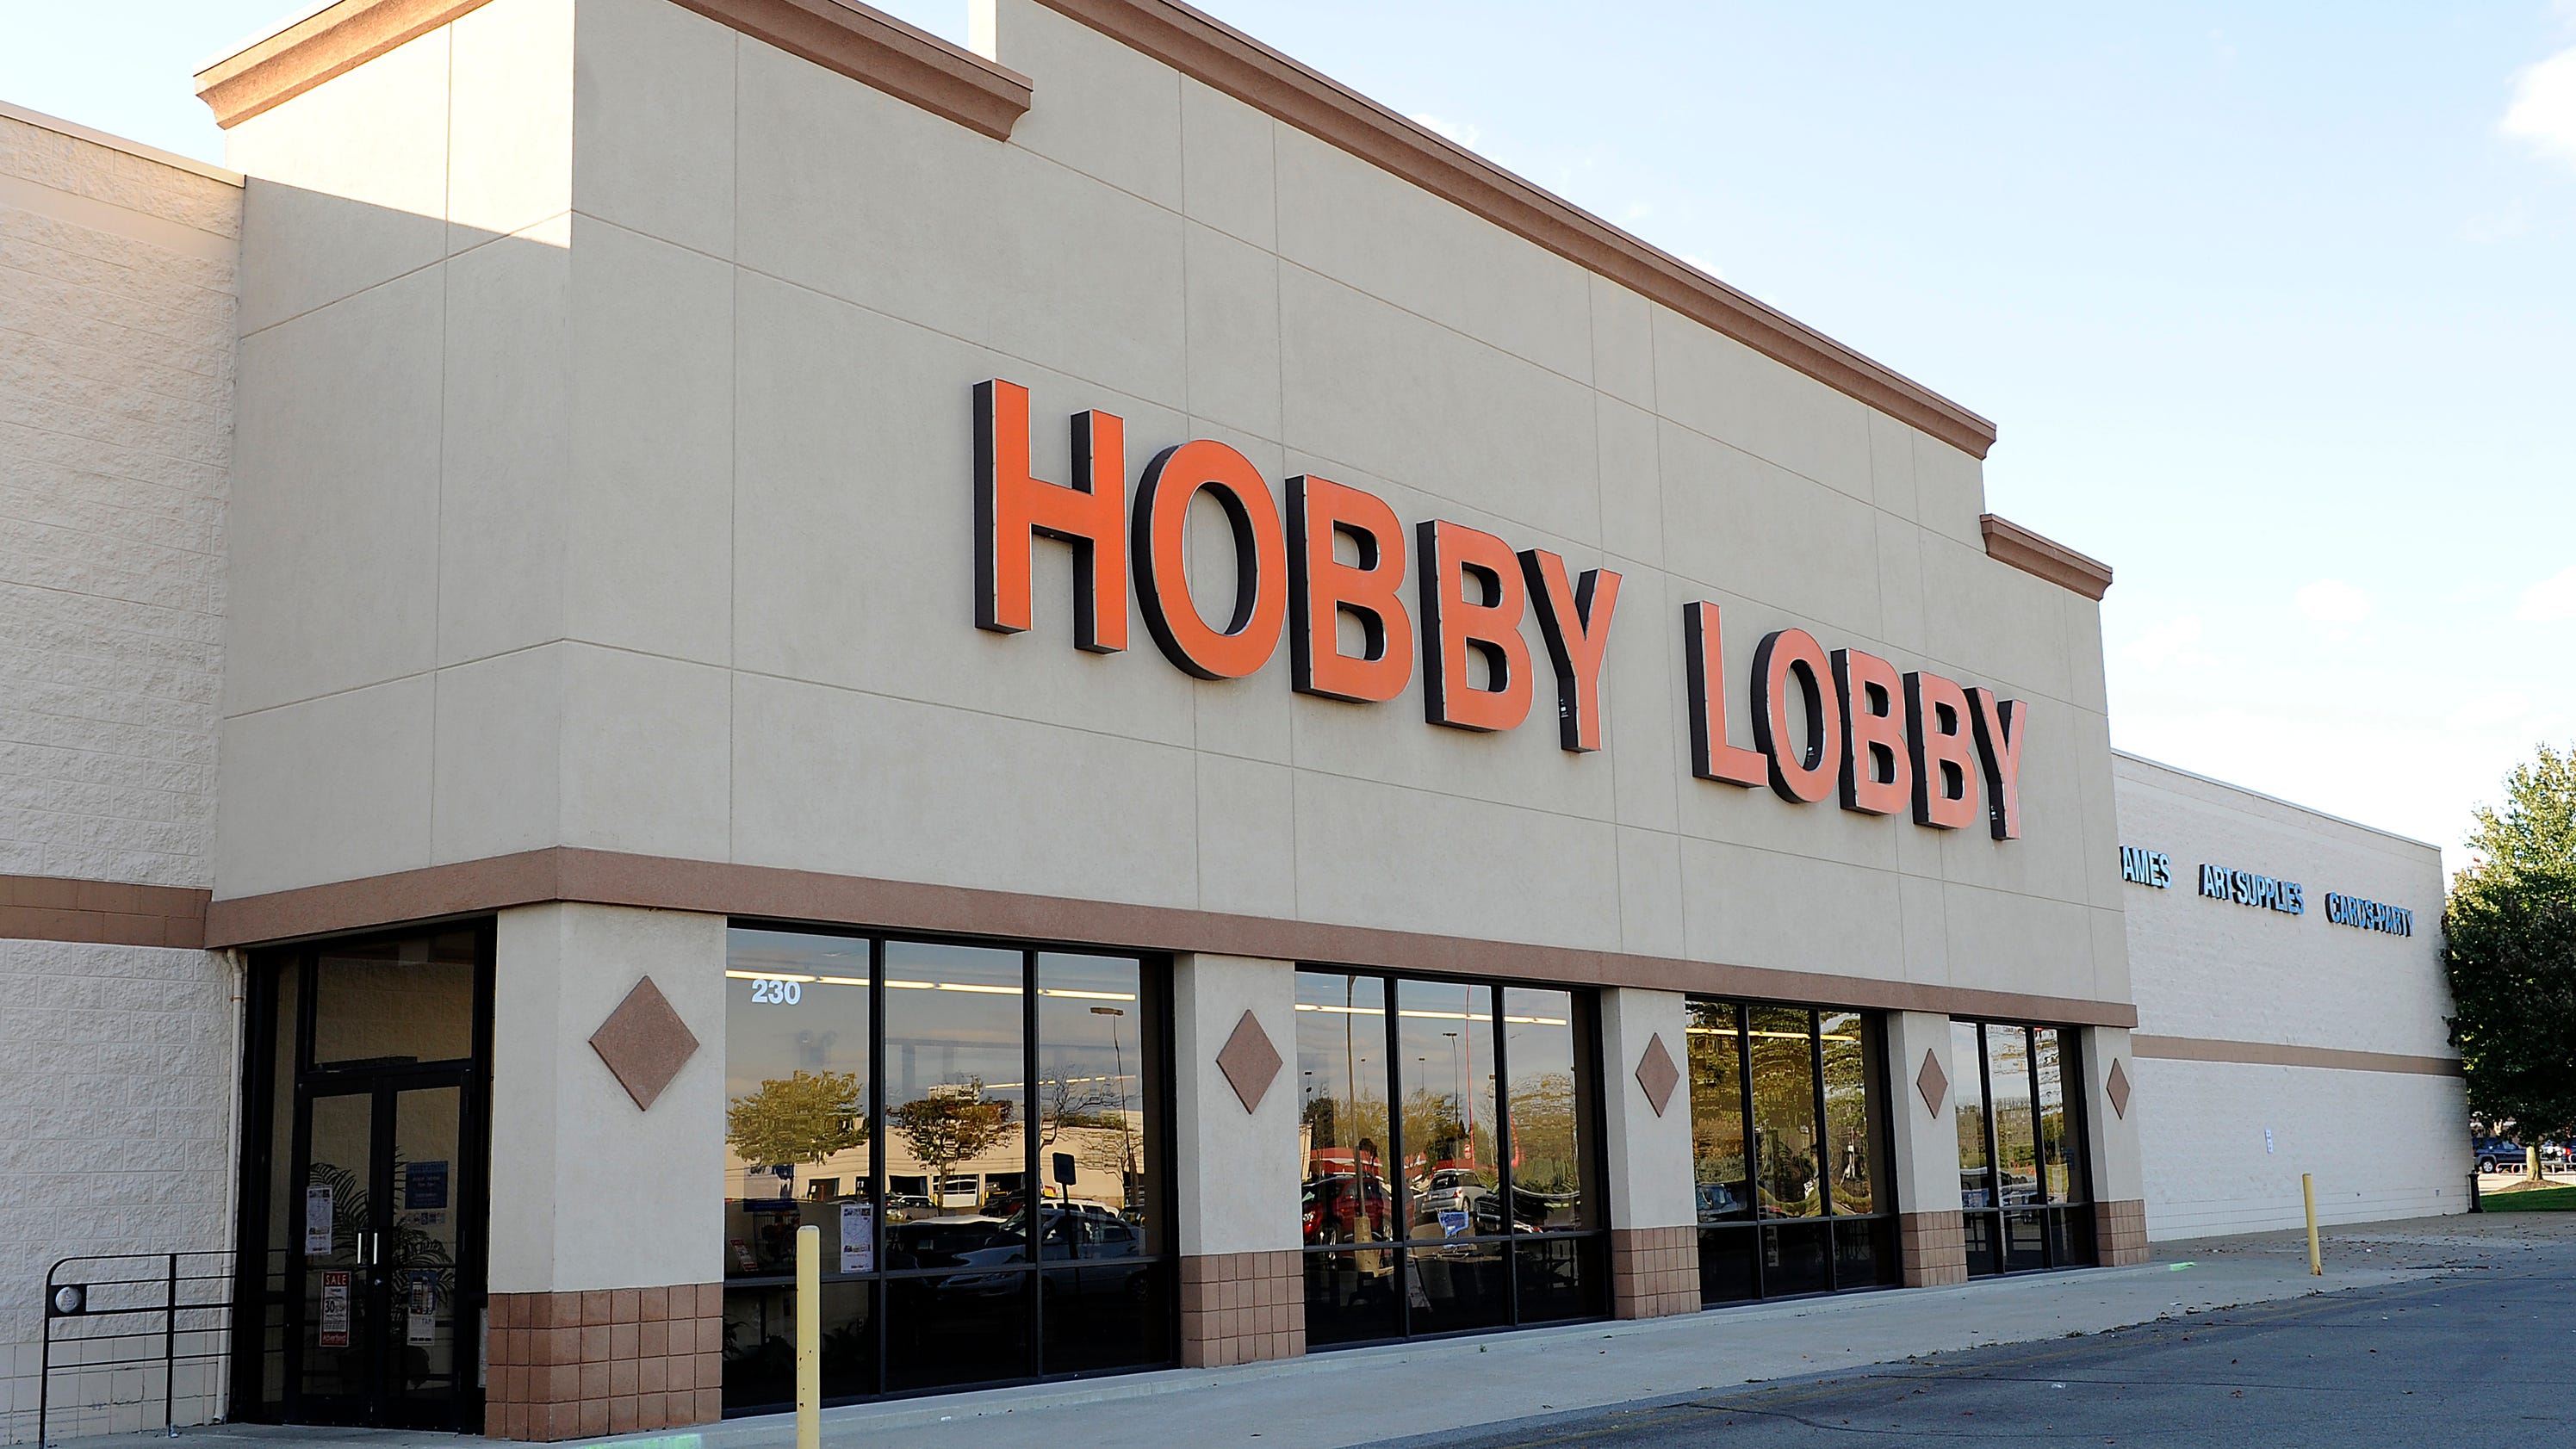  Hobby Lobby Opens New Store Rural King Here In April